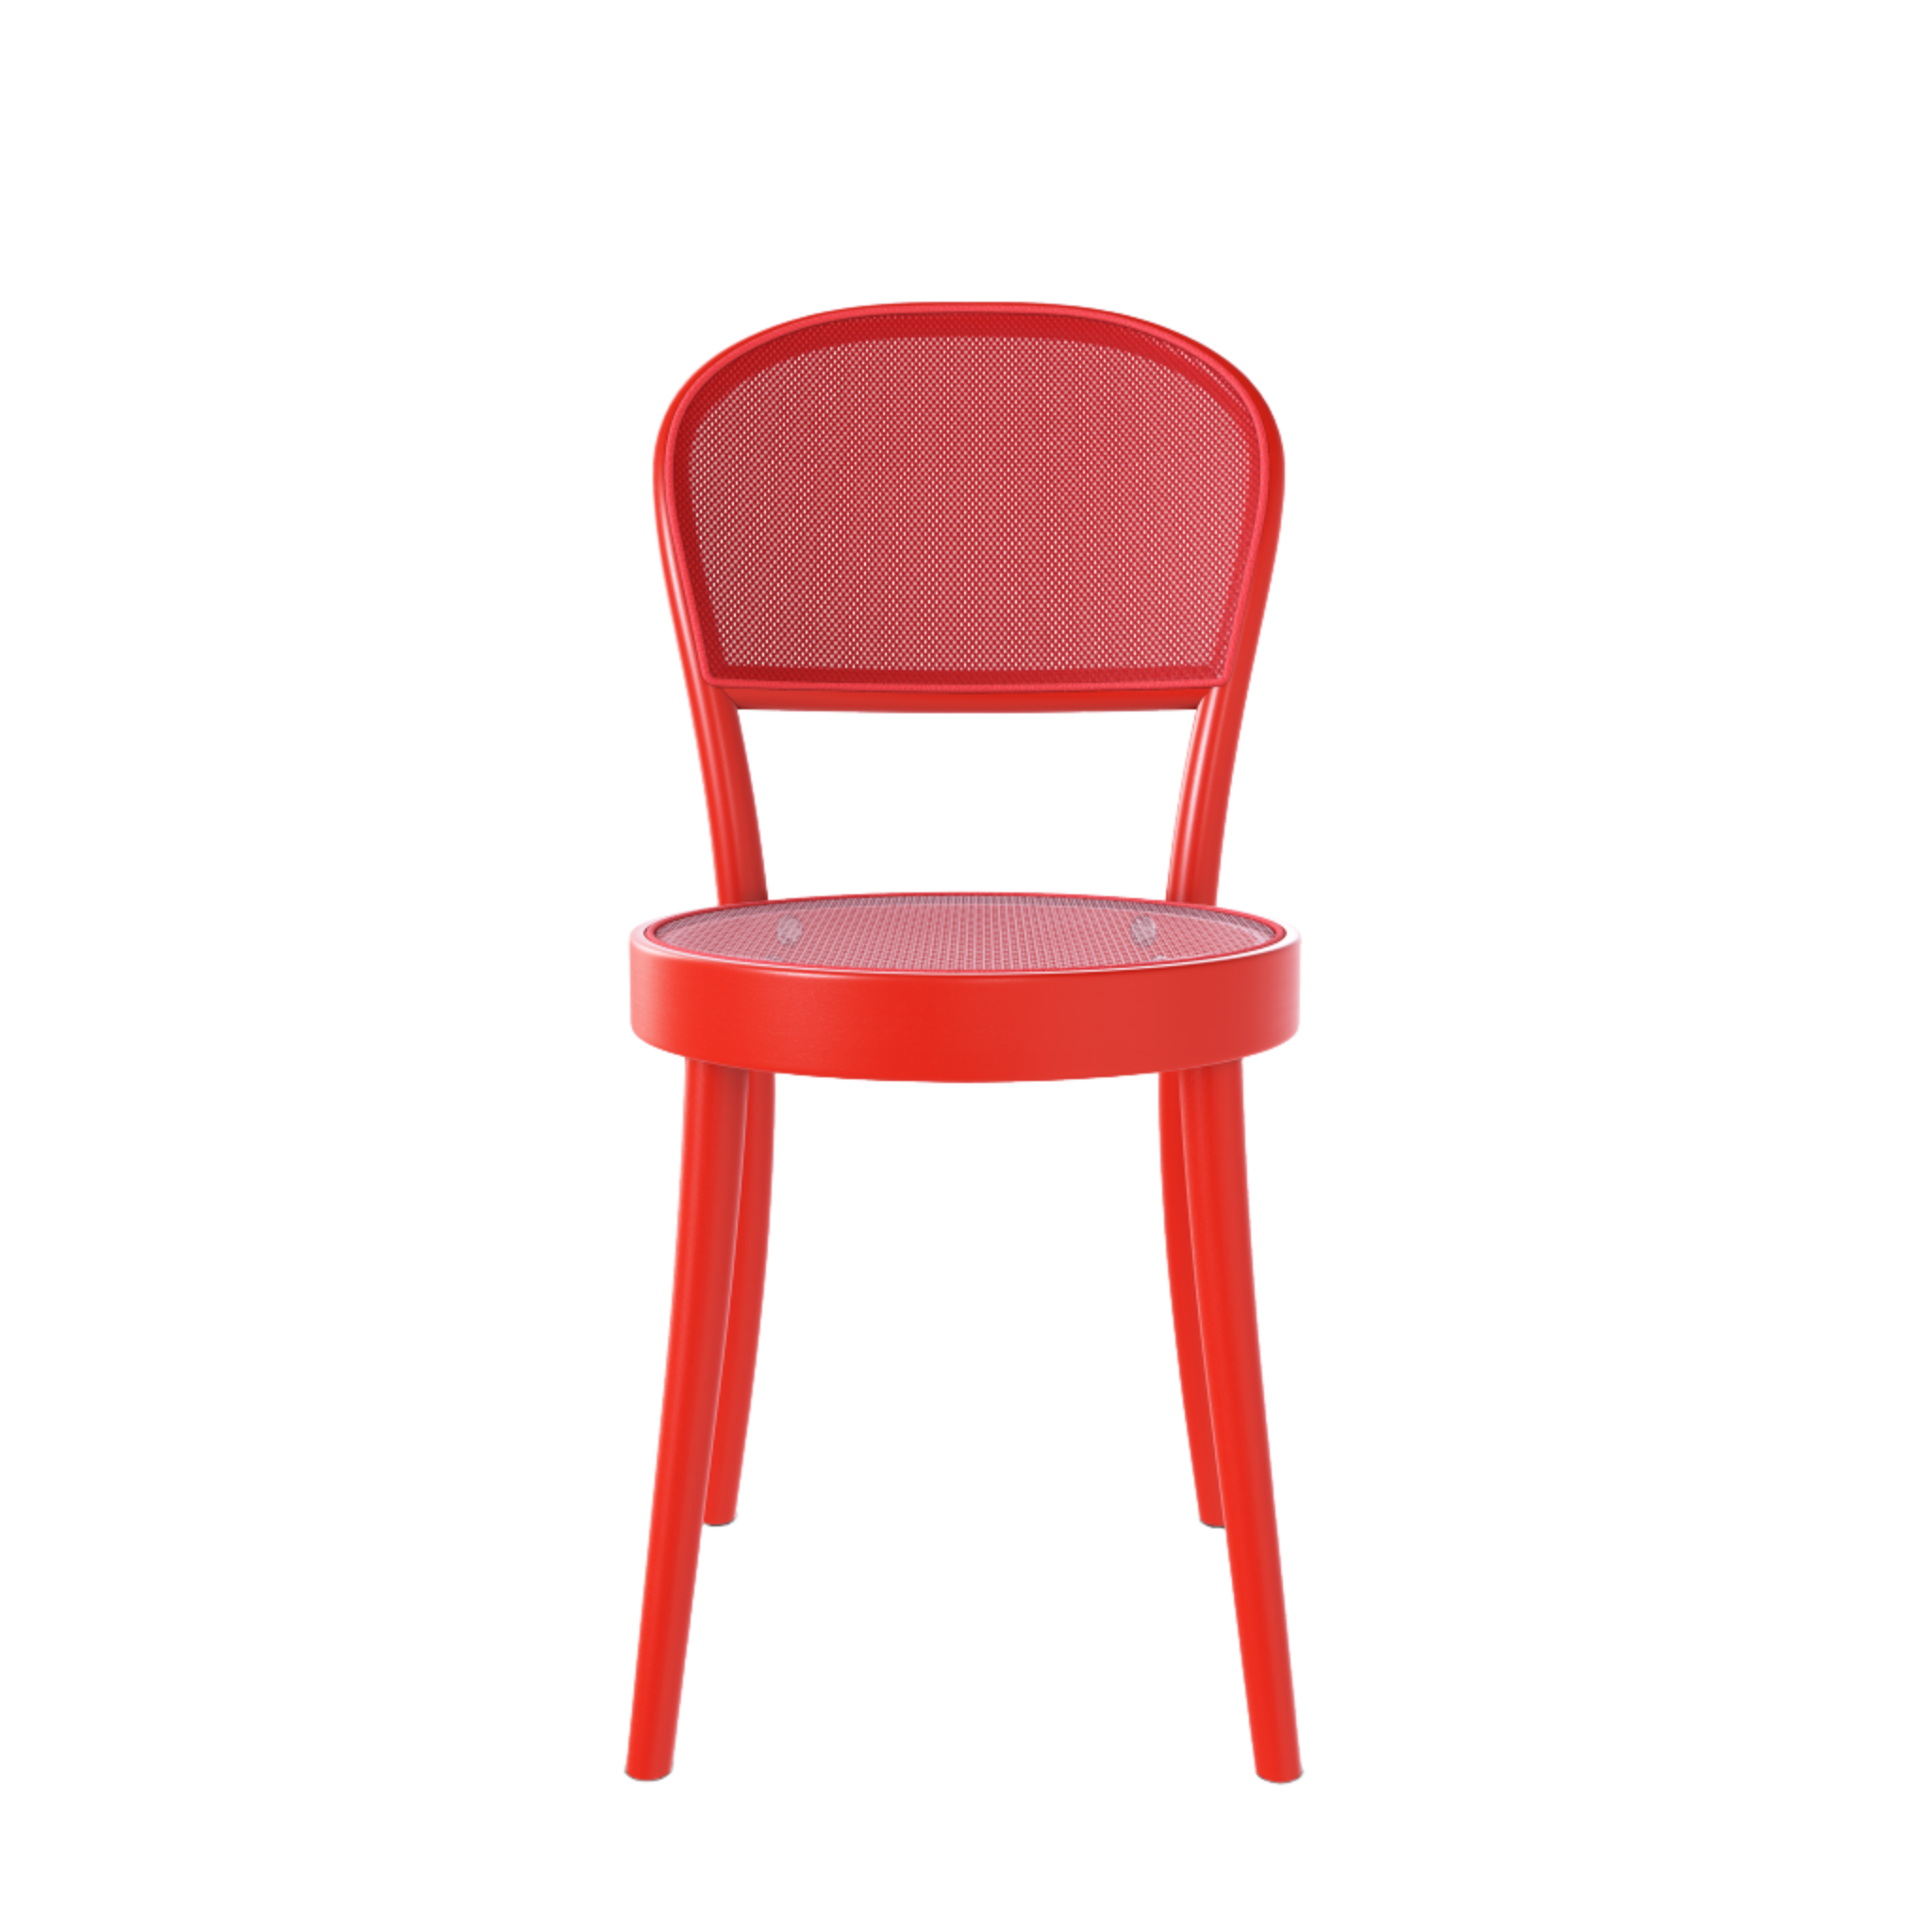 Ton 314 chair with matching seat mesh in factory red